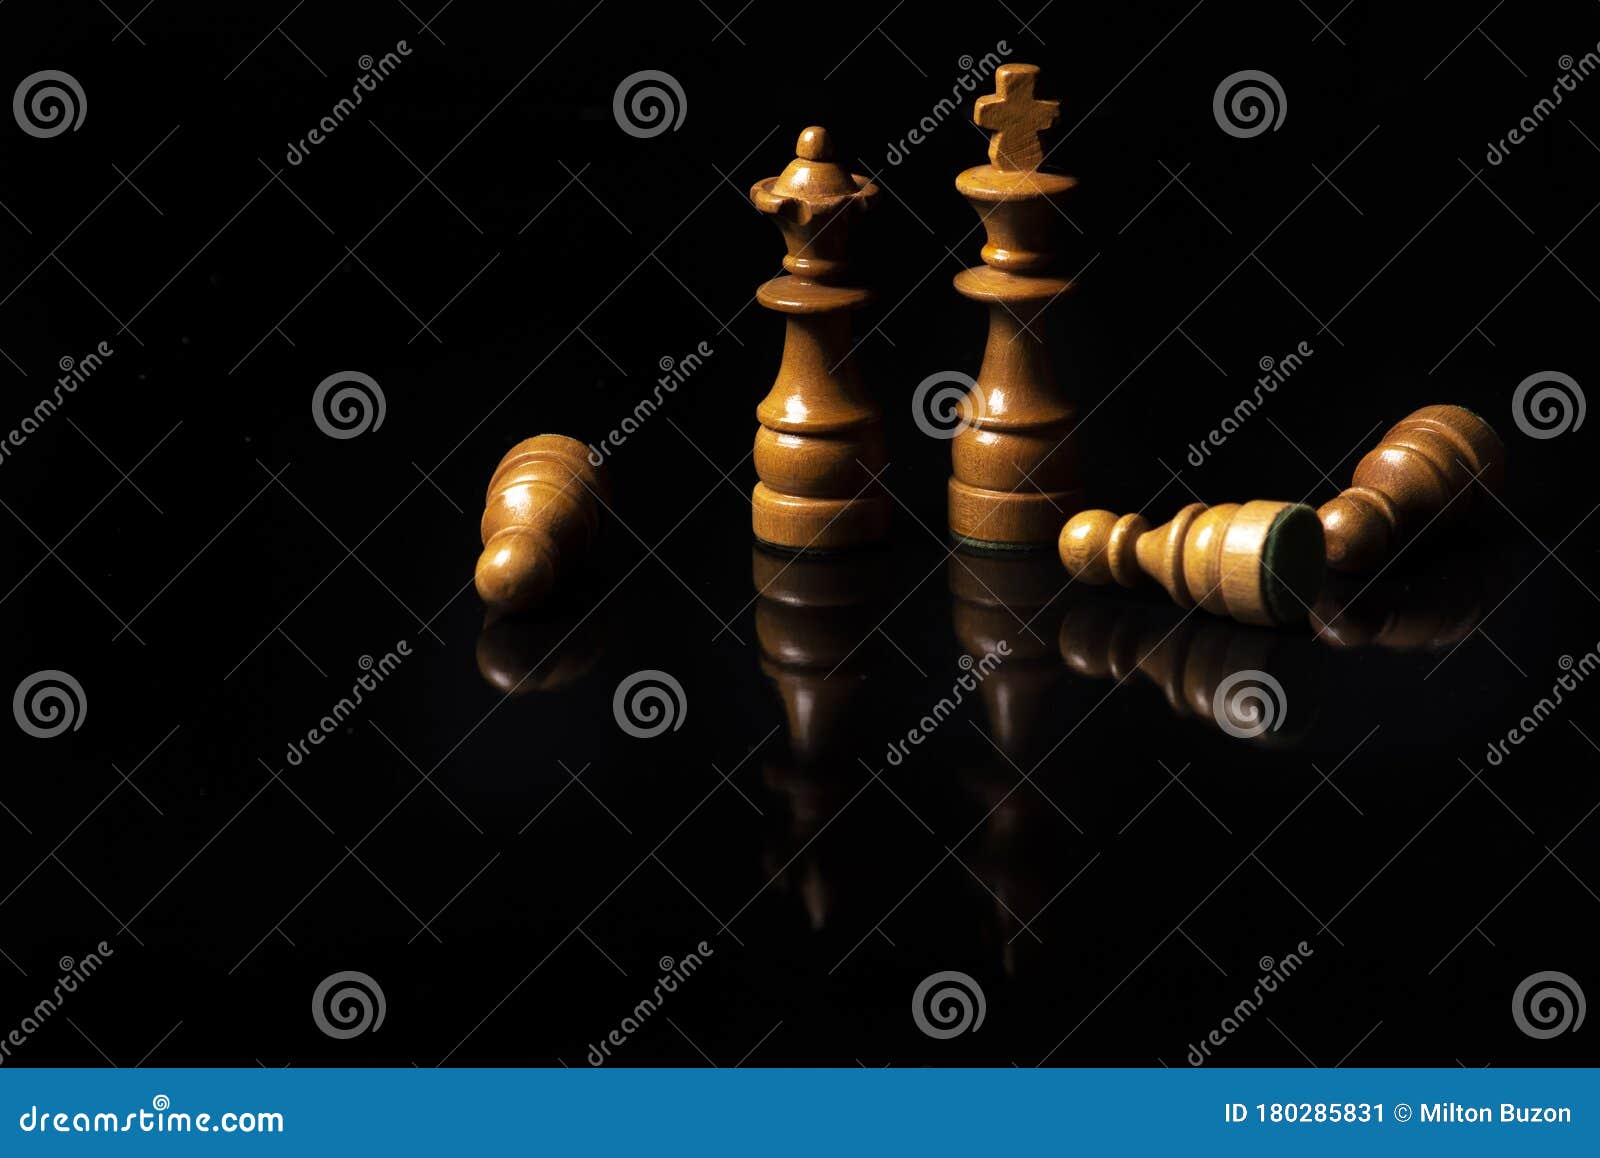 beautiful and detailed chess pieces